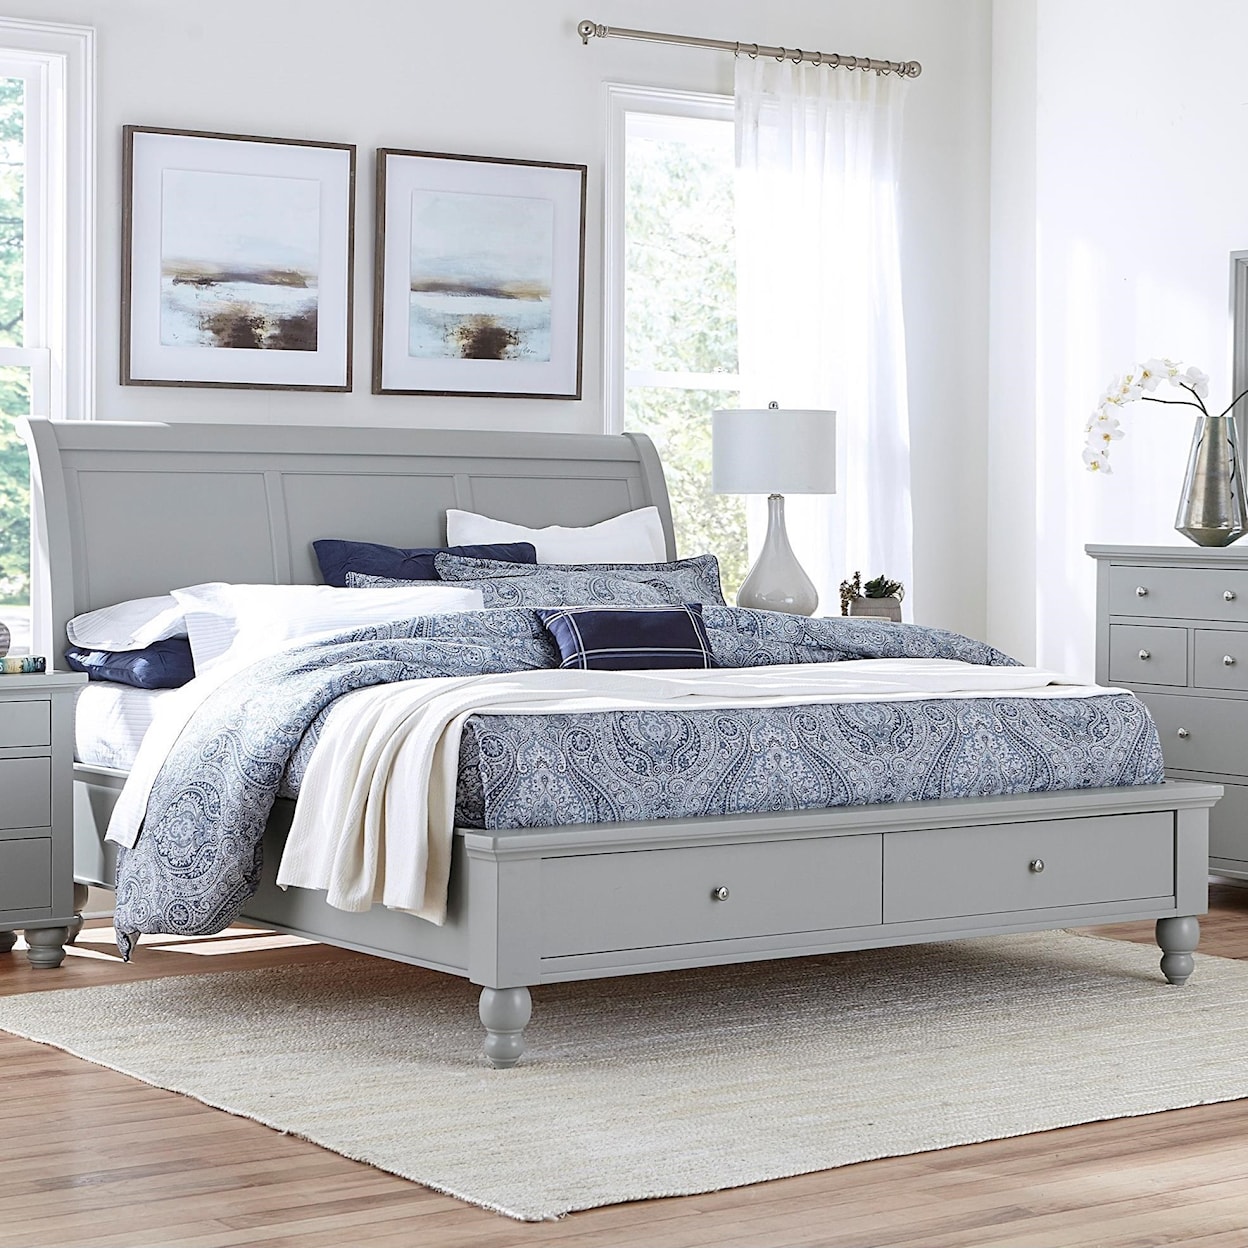 Aspenhome Cambridge King Sleigh Bed With Storage Drawers